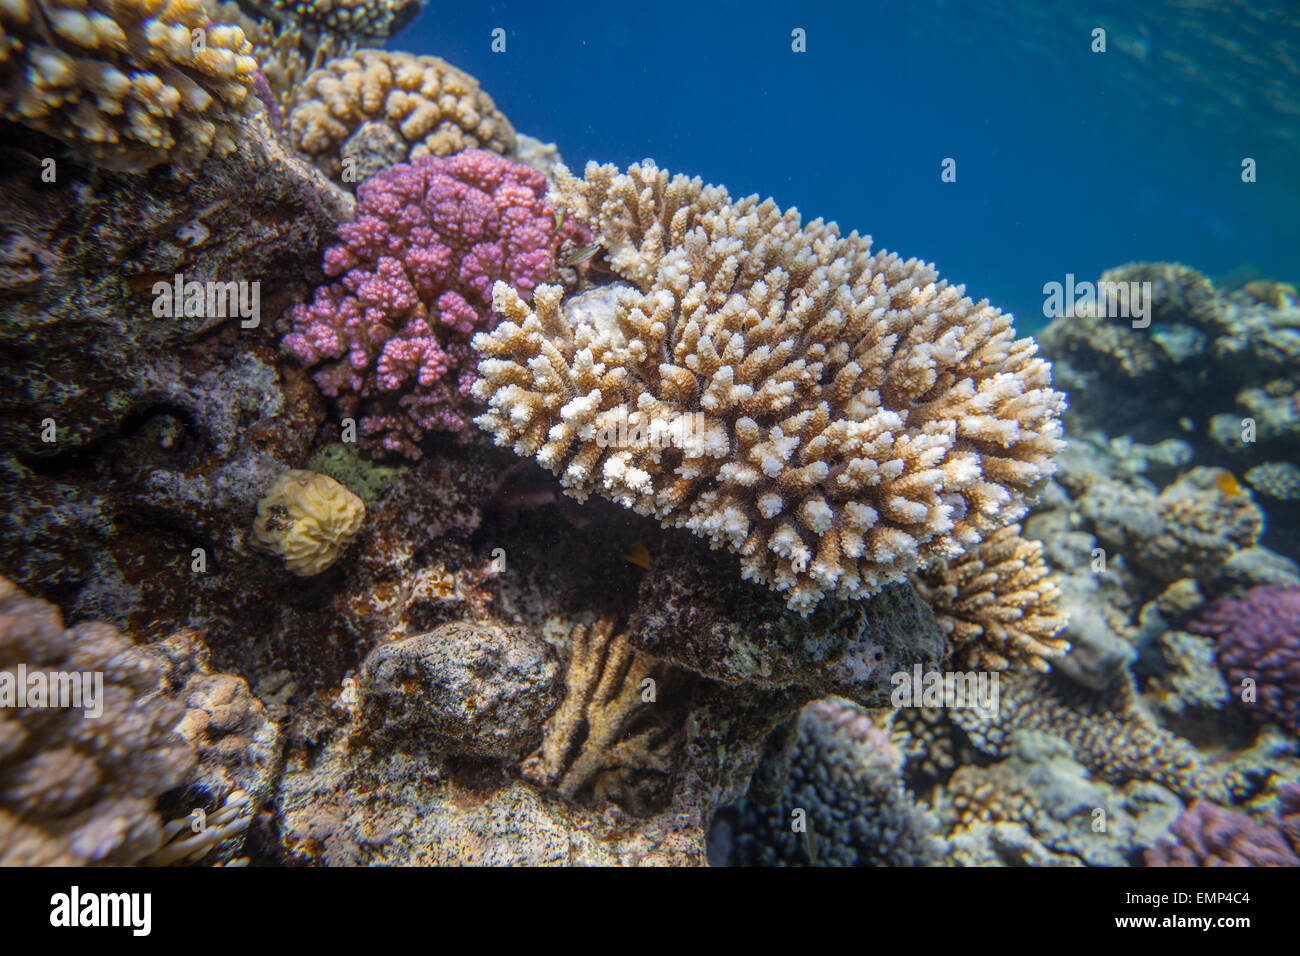 Red Sea Coral reef Stockfotografie - Alamy